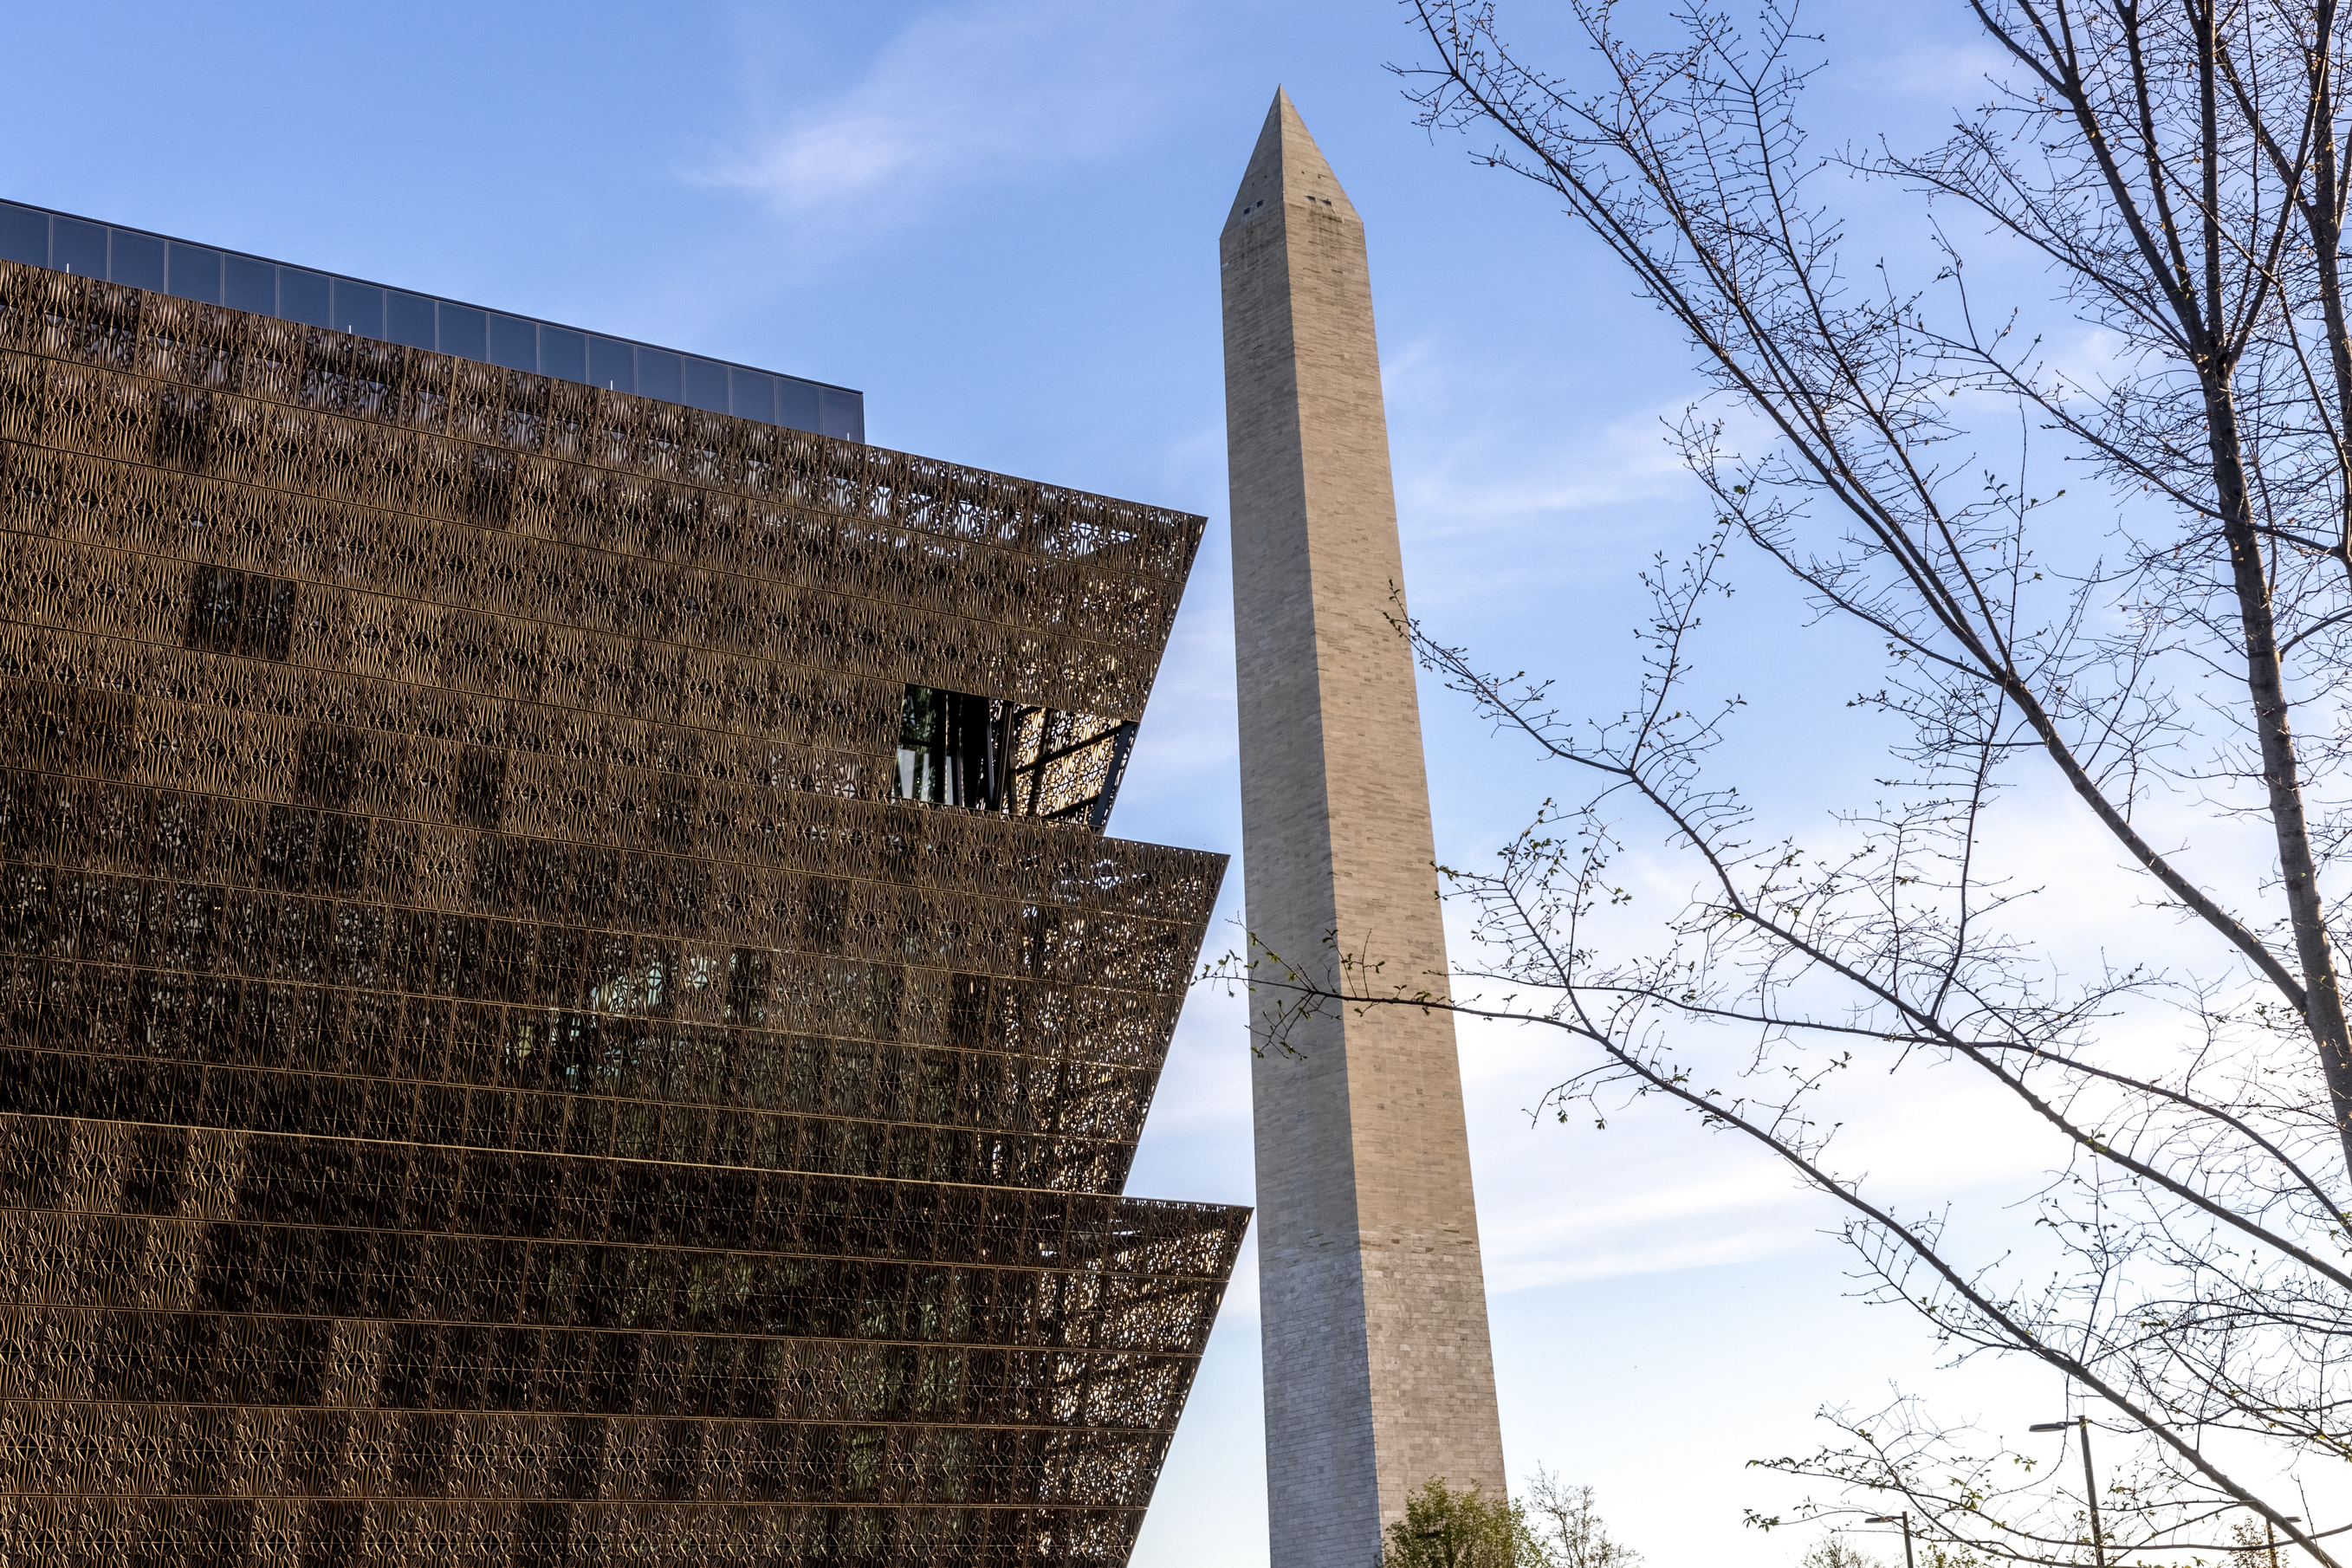 Photo of the National Museum of African American History and Culture with the Washington Monument in the background